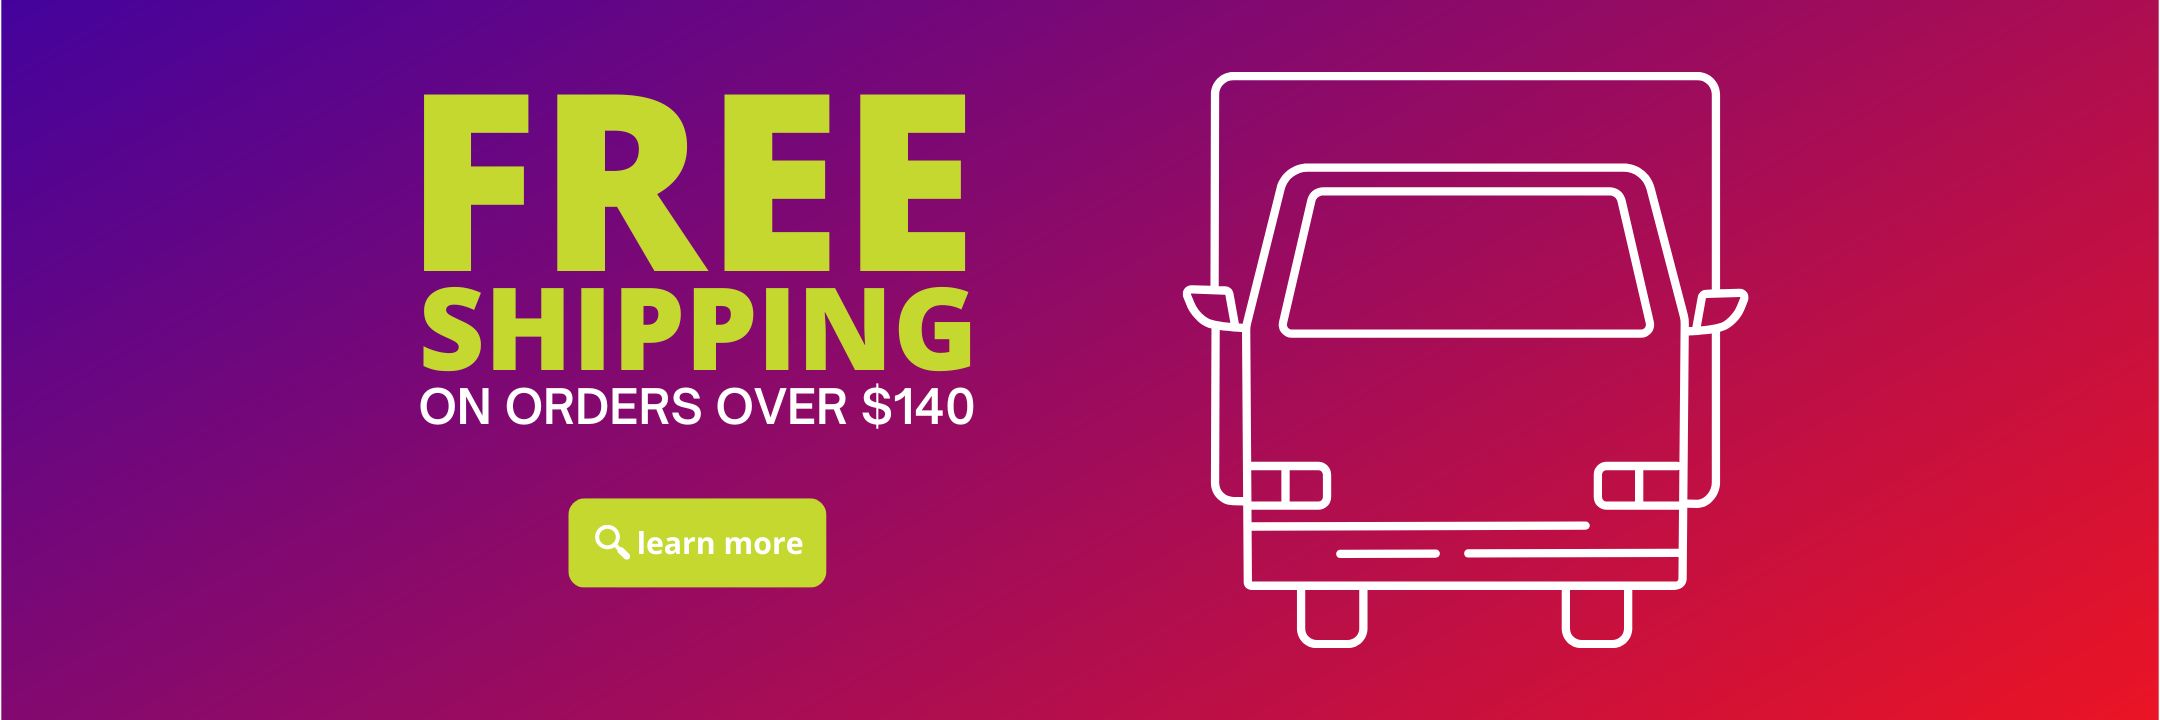 Free shipping on orders over $140 picture of van